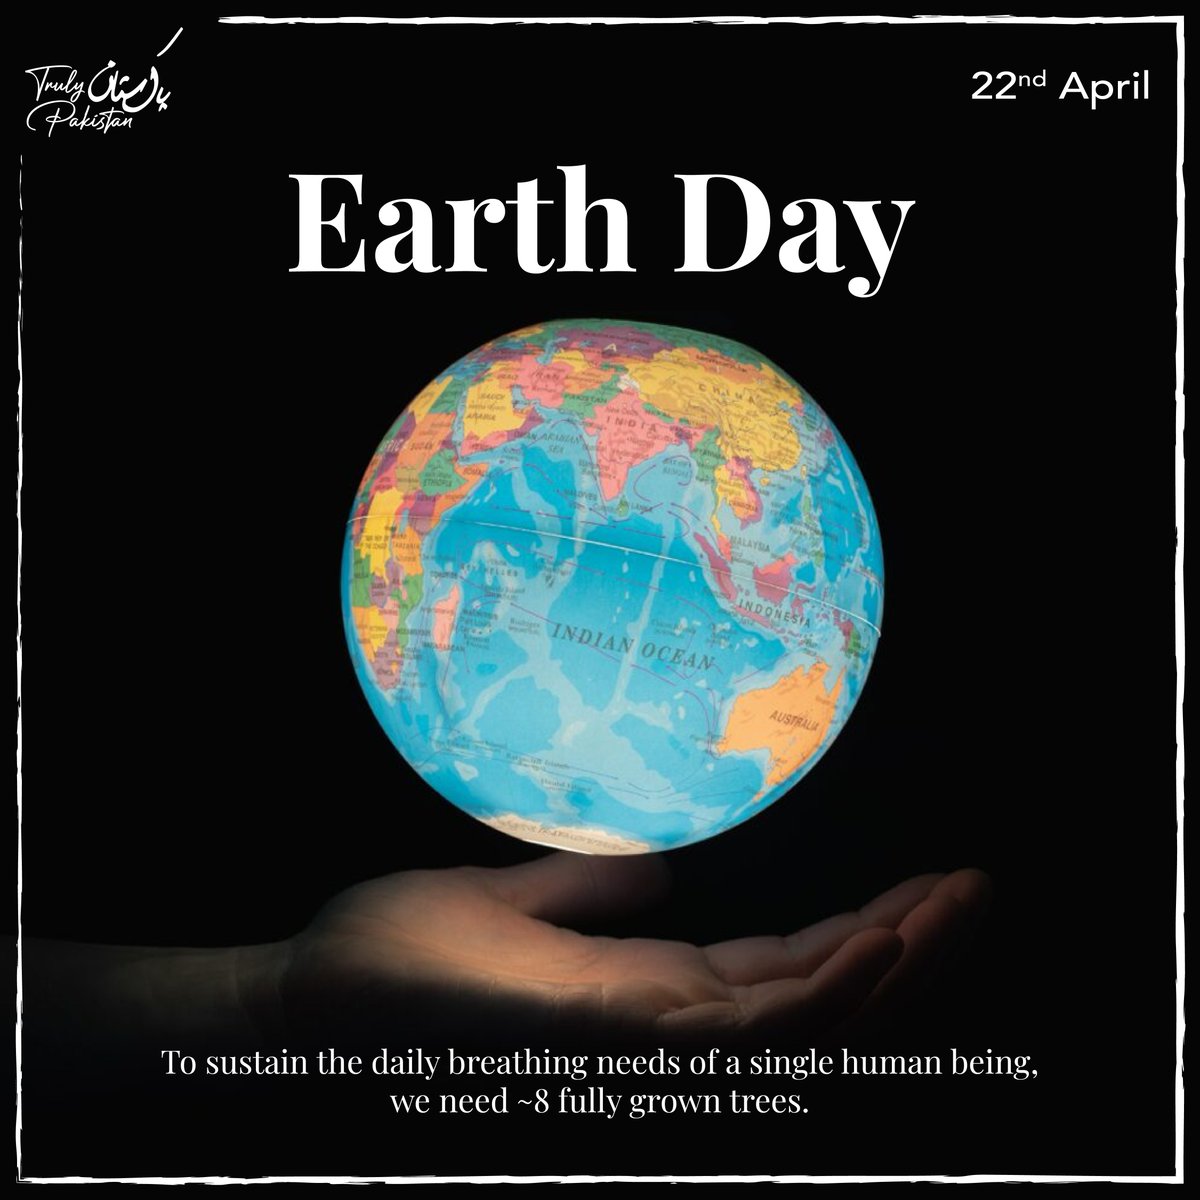 Every action counts. Celebrate Earth Day by making a conscious choice to reduce your environmental footprint.
 
#TrulyPakistan #EarthDay #EnvironmentalFootprint #BeMindful #Sustainability